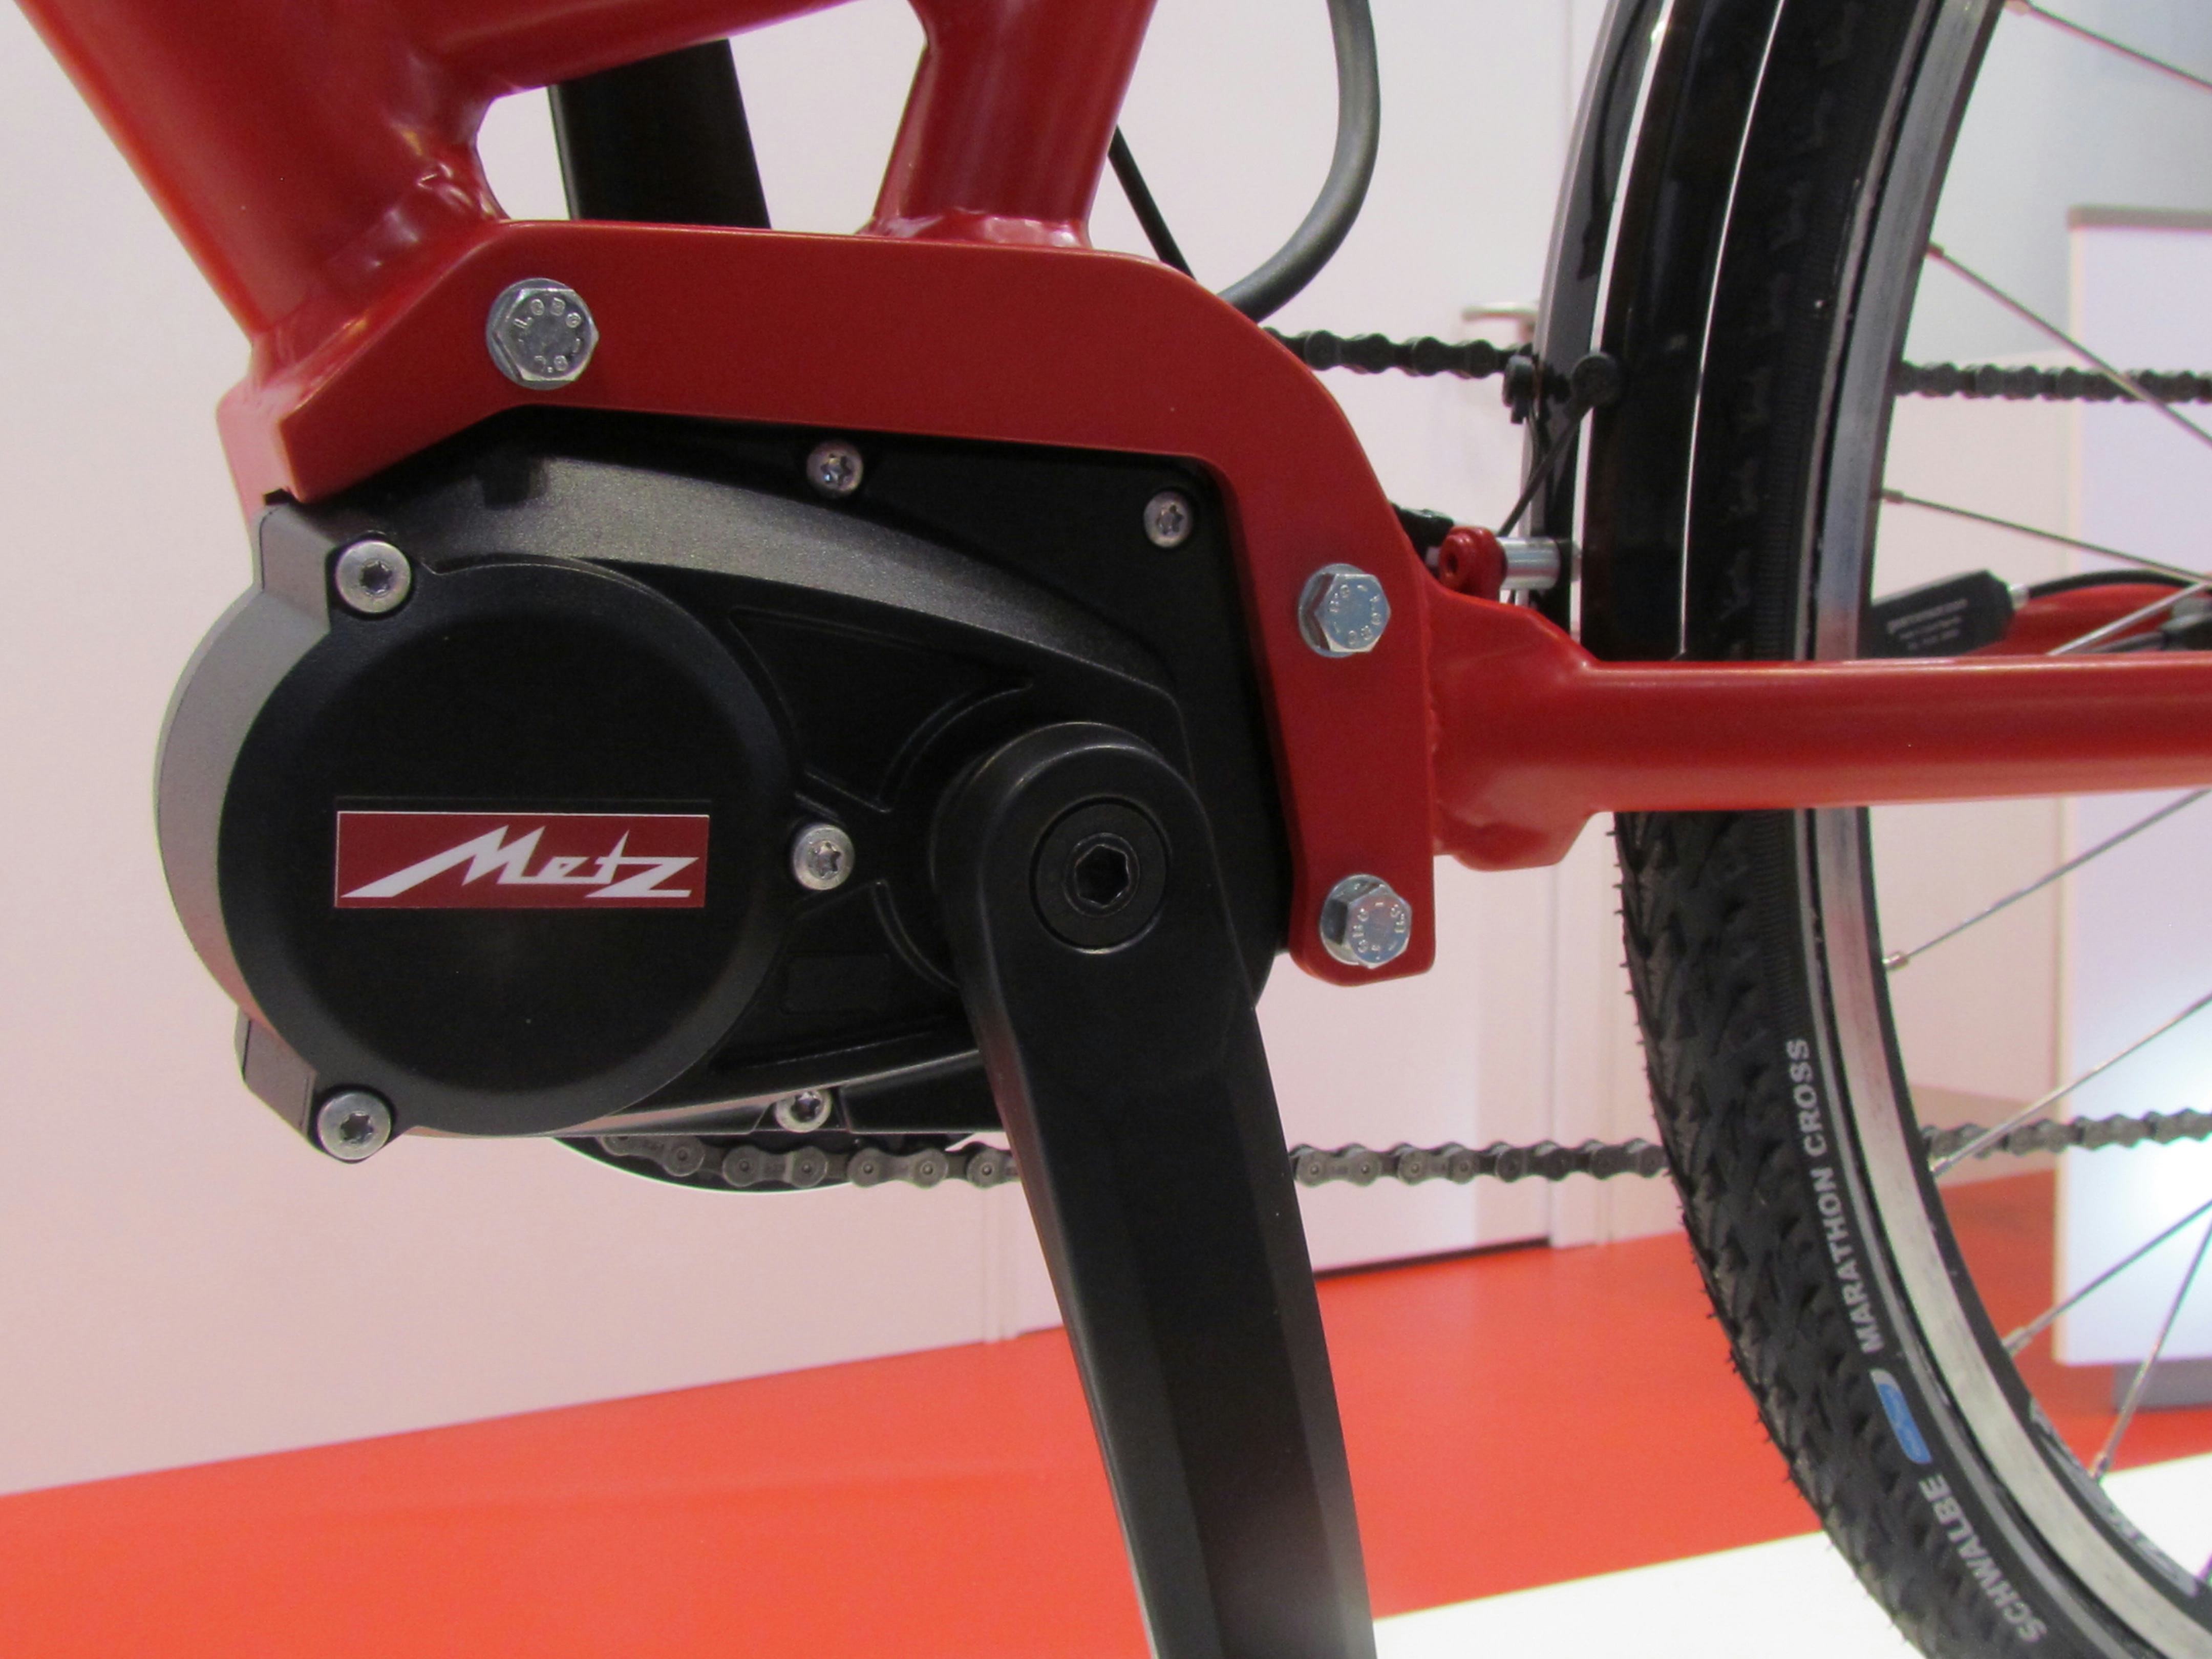 New drive supplier Metz has roots in automotive but through its owner Daum also in e-bikes and bicycle ergometers.- Photo Bike Europe